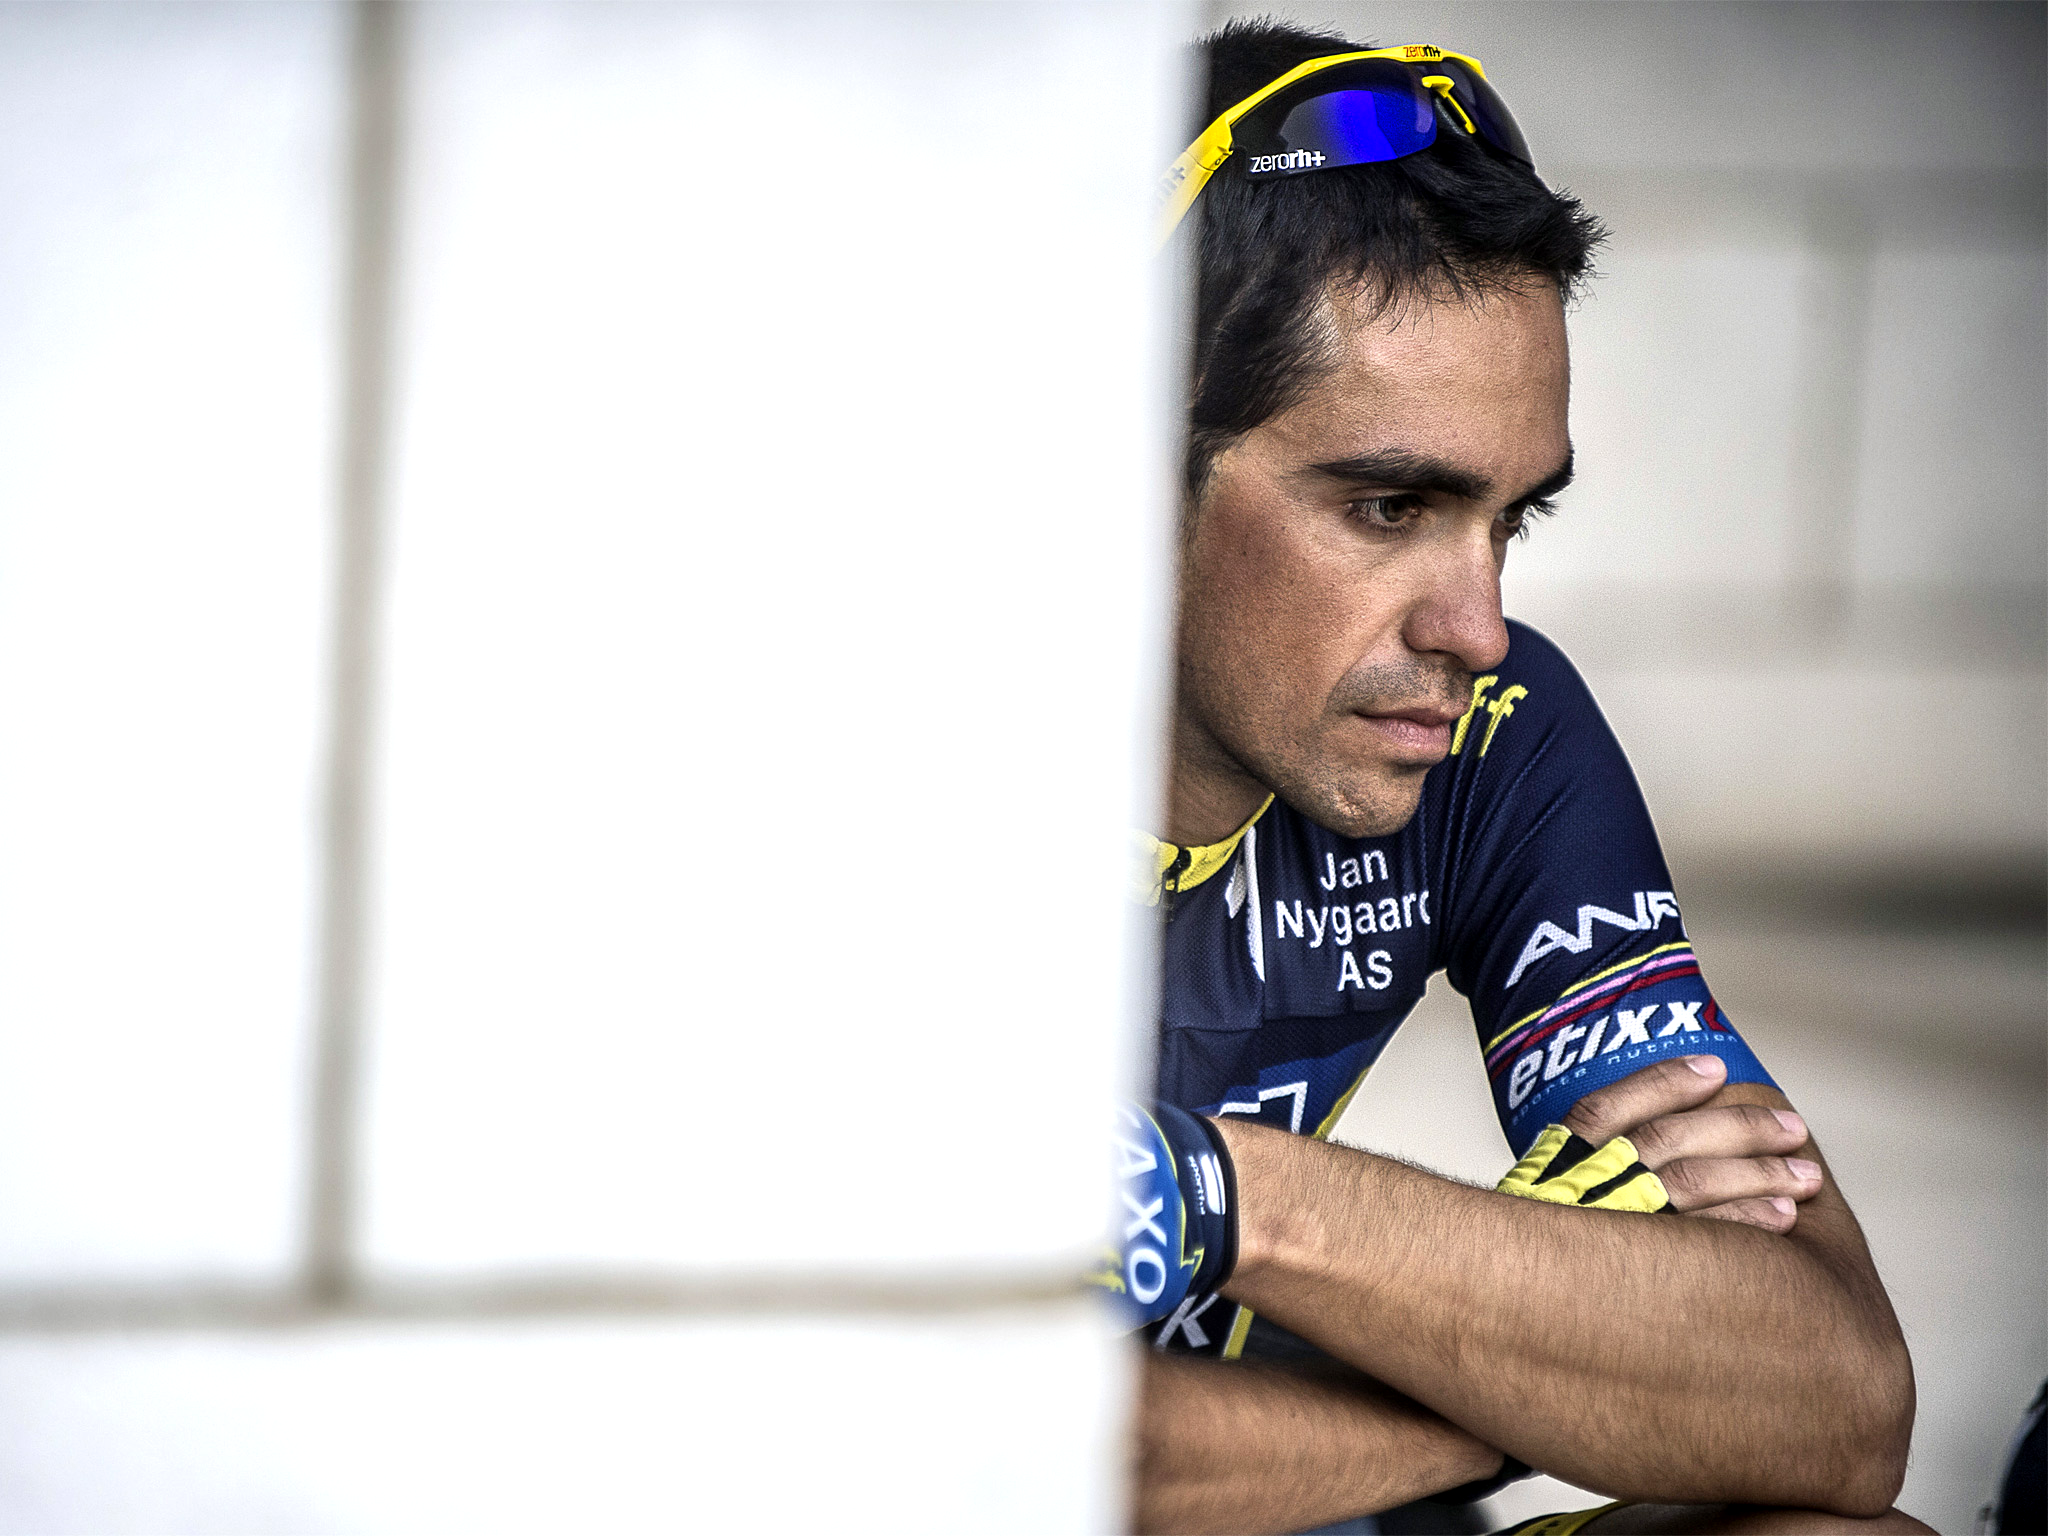 Alberto Contador expects Chris Froome to be his main challenger in the Tour de France